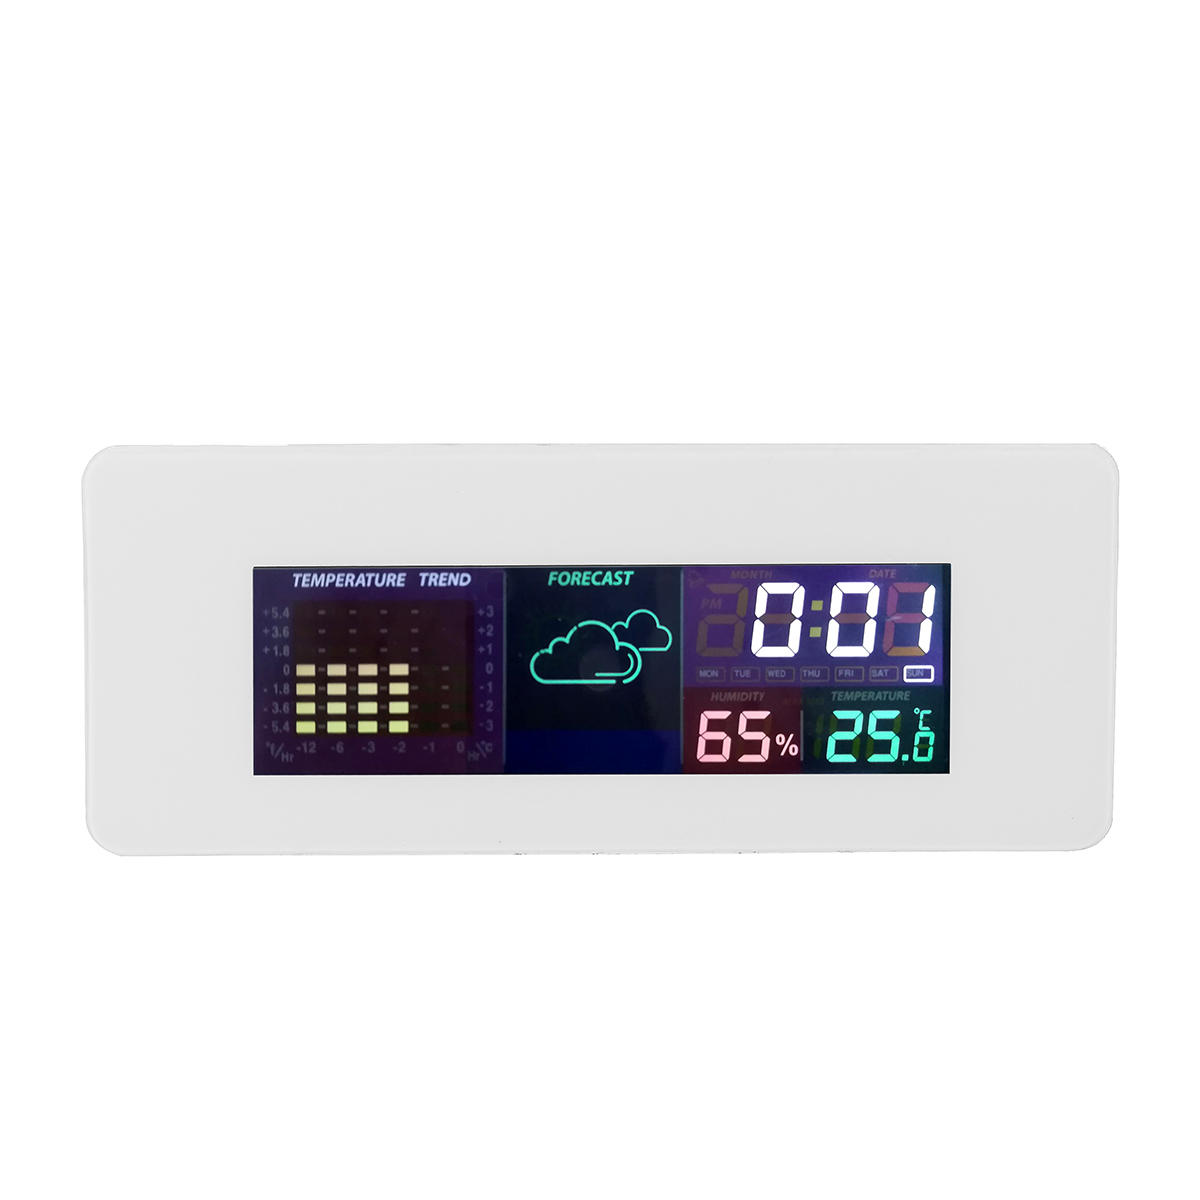 Multi-function Color Screen Temperature Humidity Meter Hygrometer Monitor Clock with Calendar Alarm Clock 12/24 Hour Sys